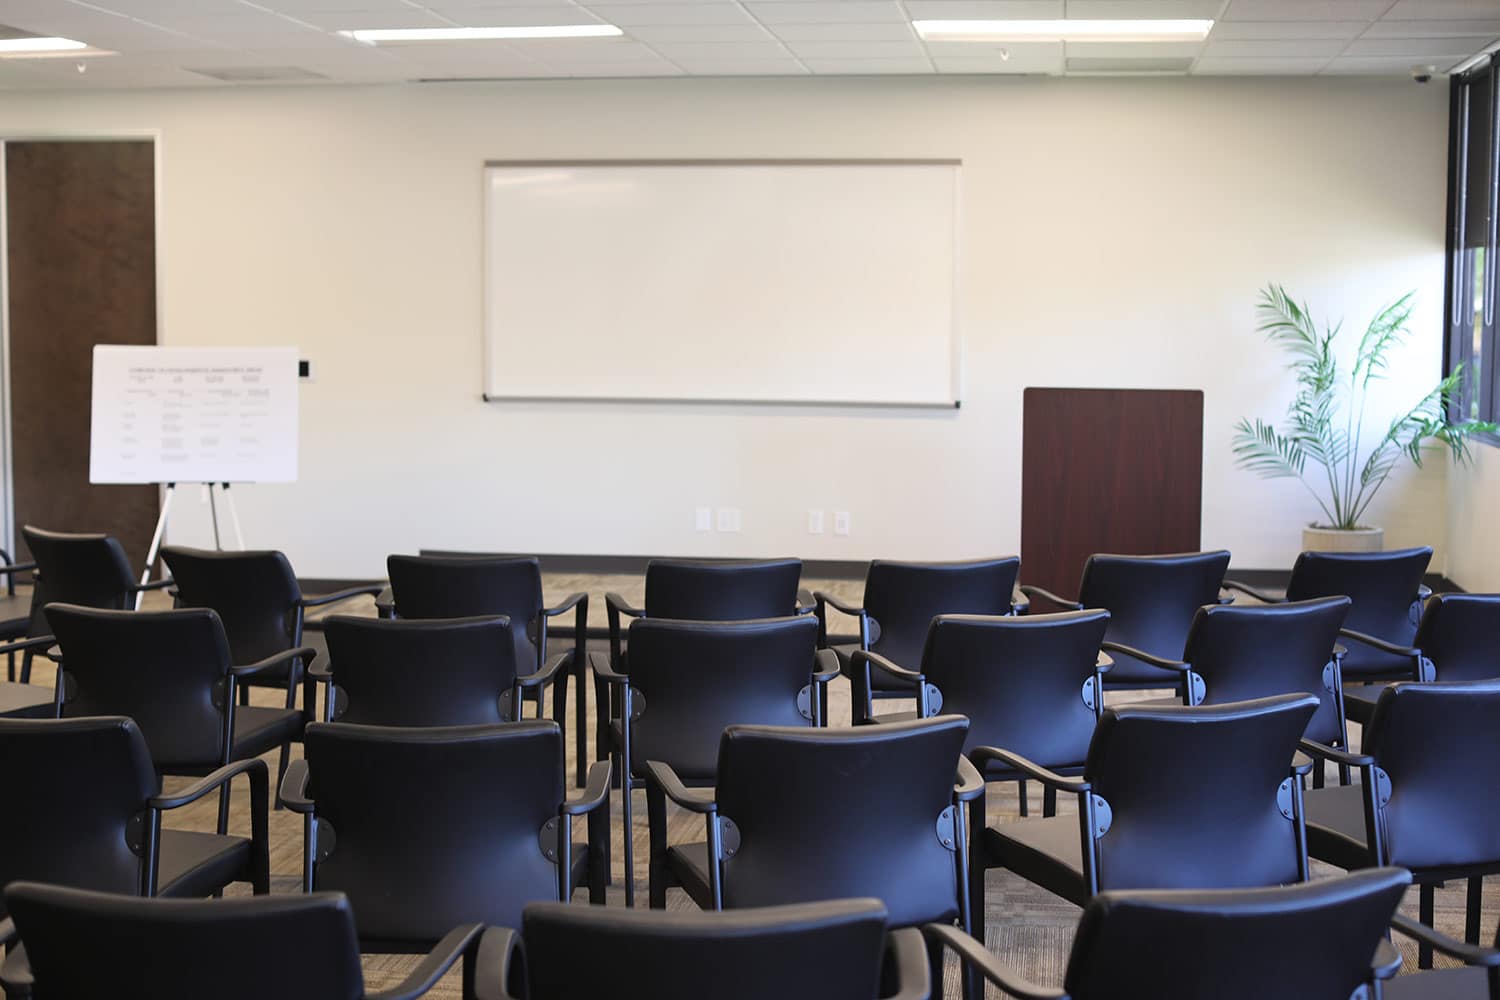 Meadows Outpatient Silicon Valley - Lecture Hall